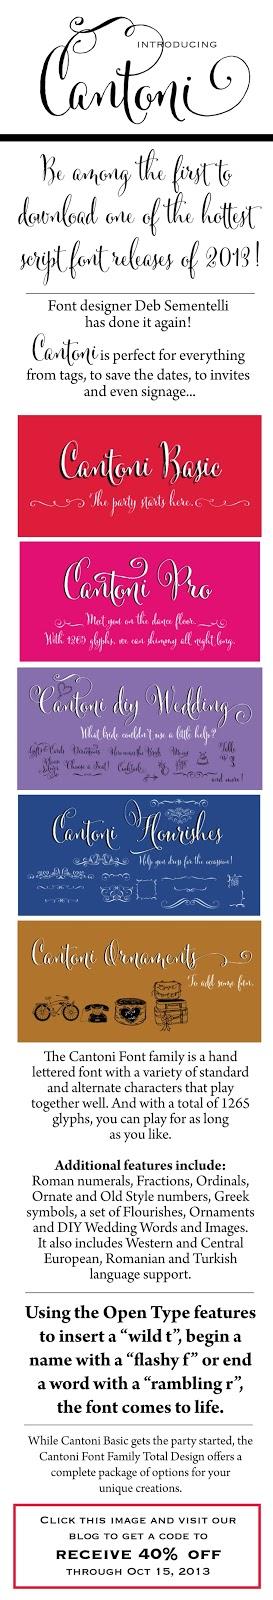 Introducing the CANTONI font family by Deb Sementelli